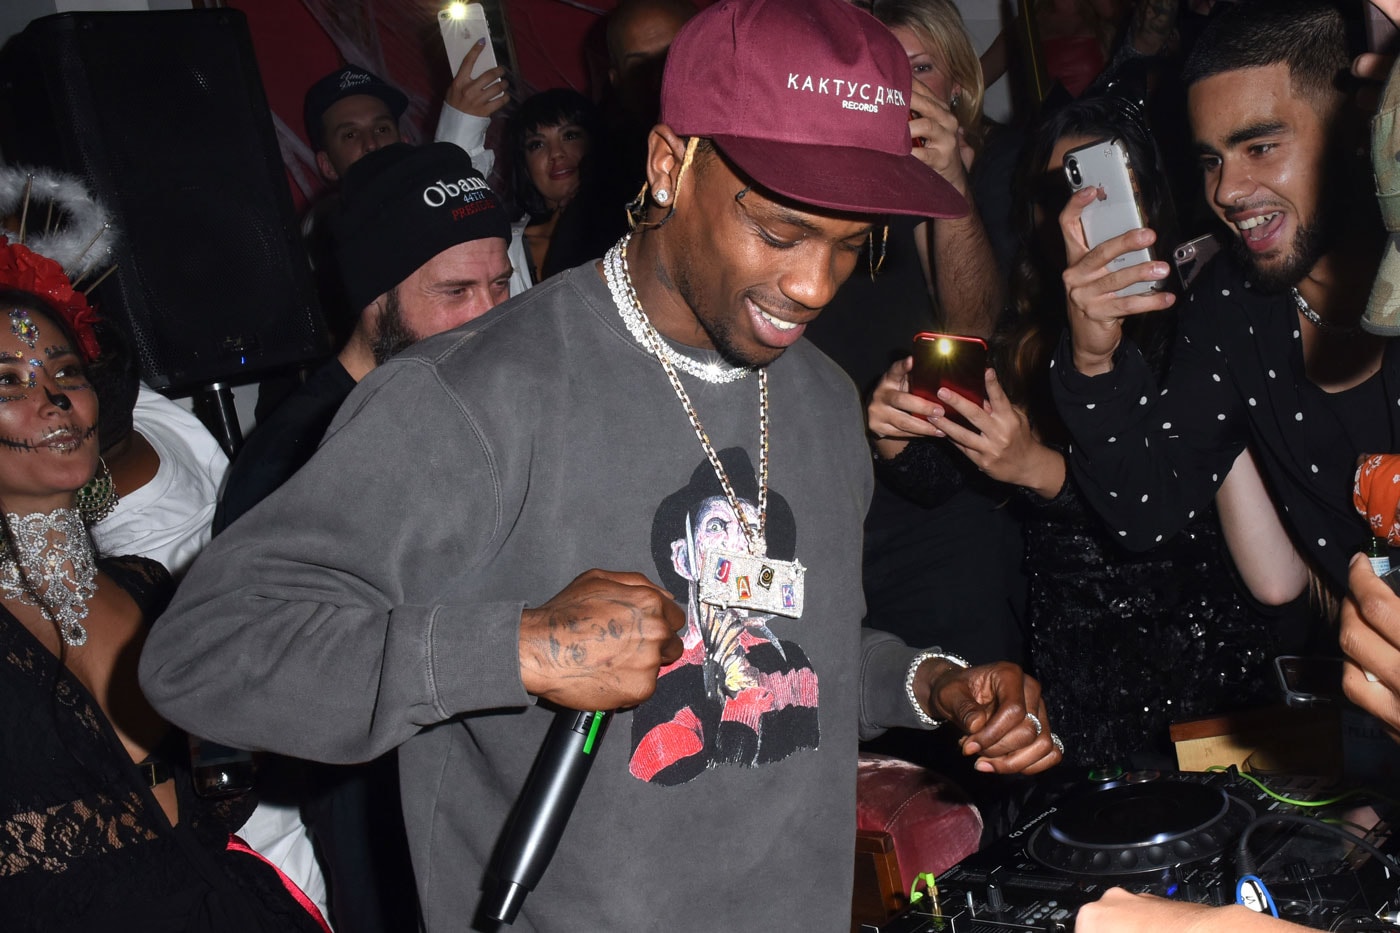 Travis Scott Maria I'm Drunk Single Featuring Young Thug Justin Bieber Has Hit Streaming Services